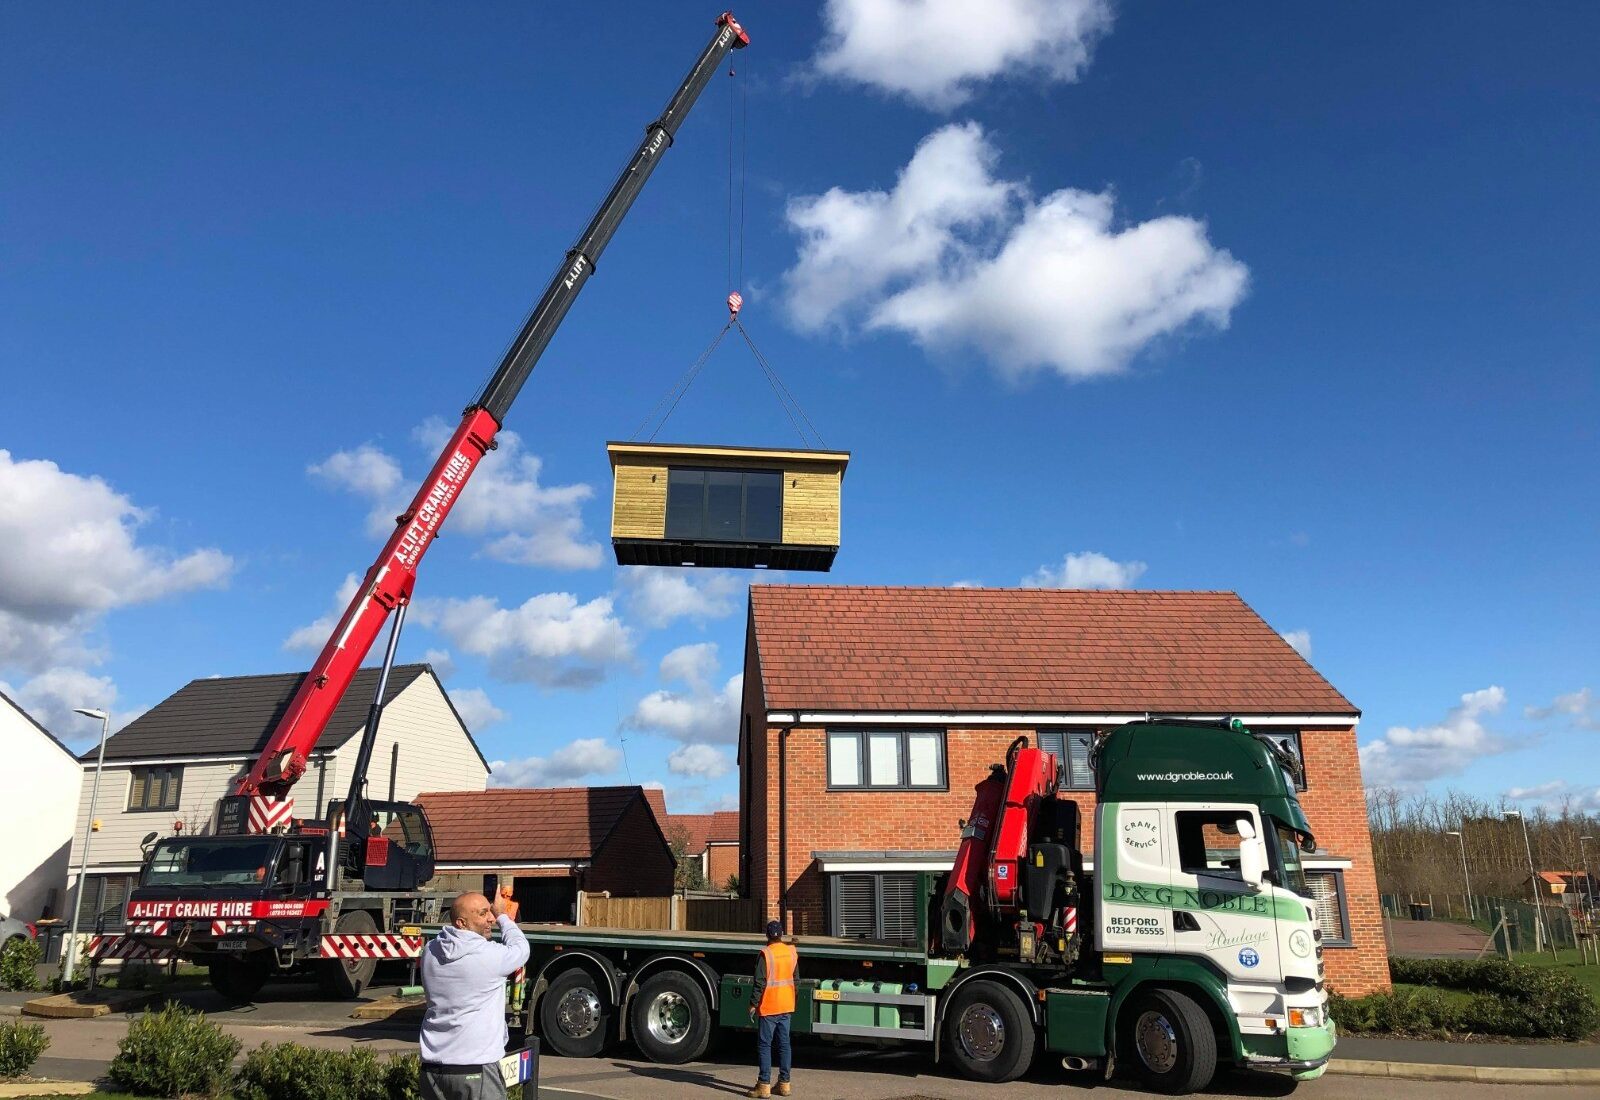 Mobile Crane Hire to lift Garden Cabin in Wootton, Bedford